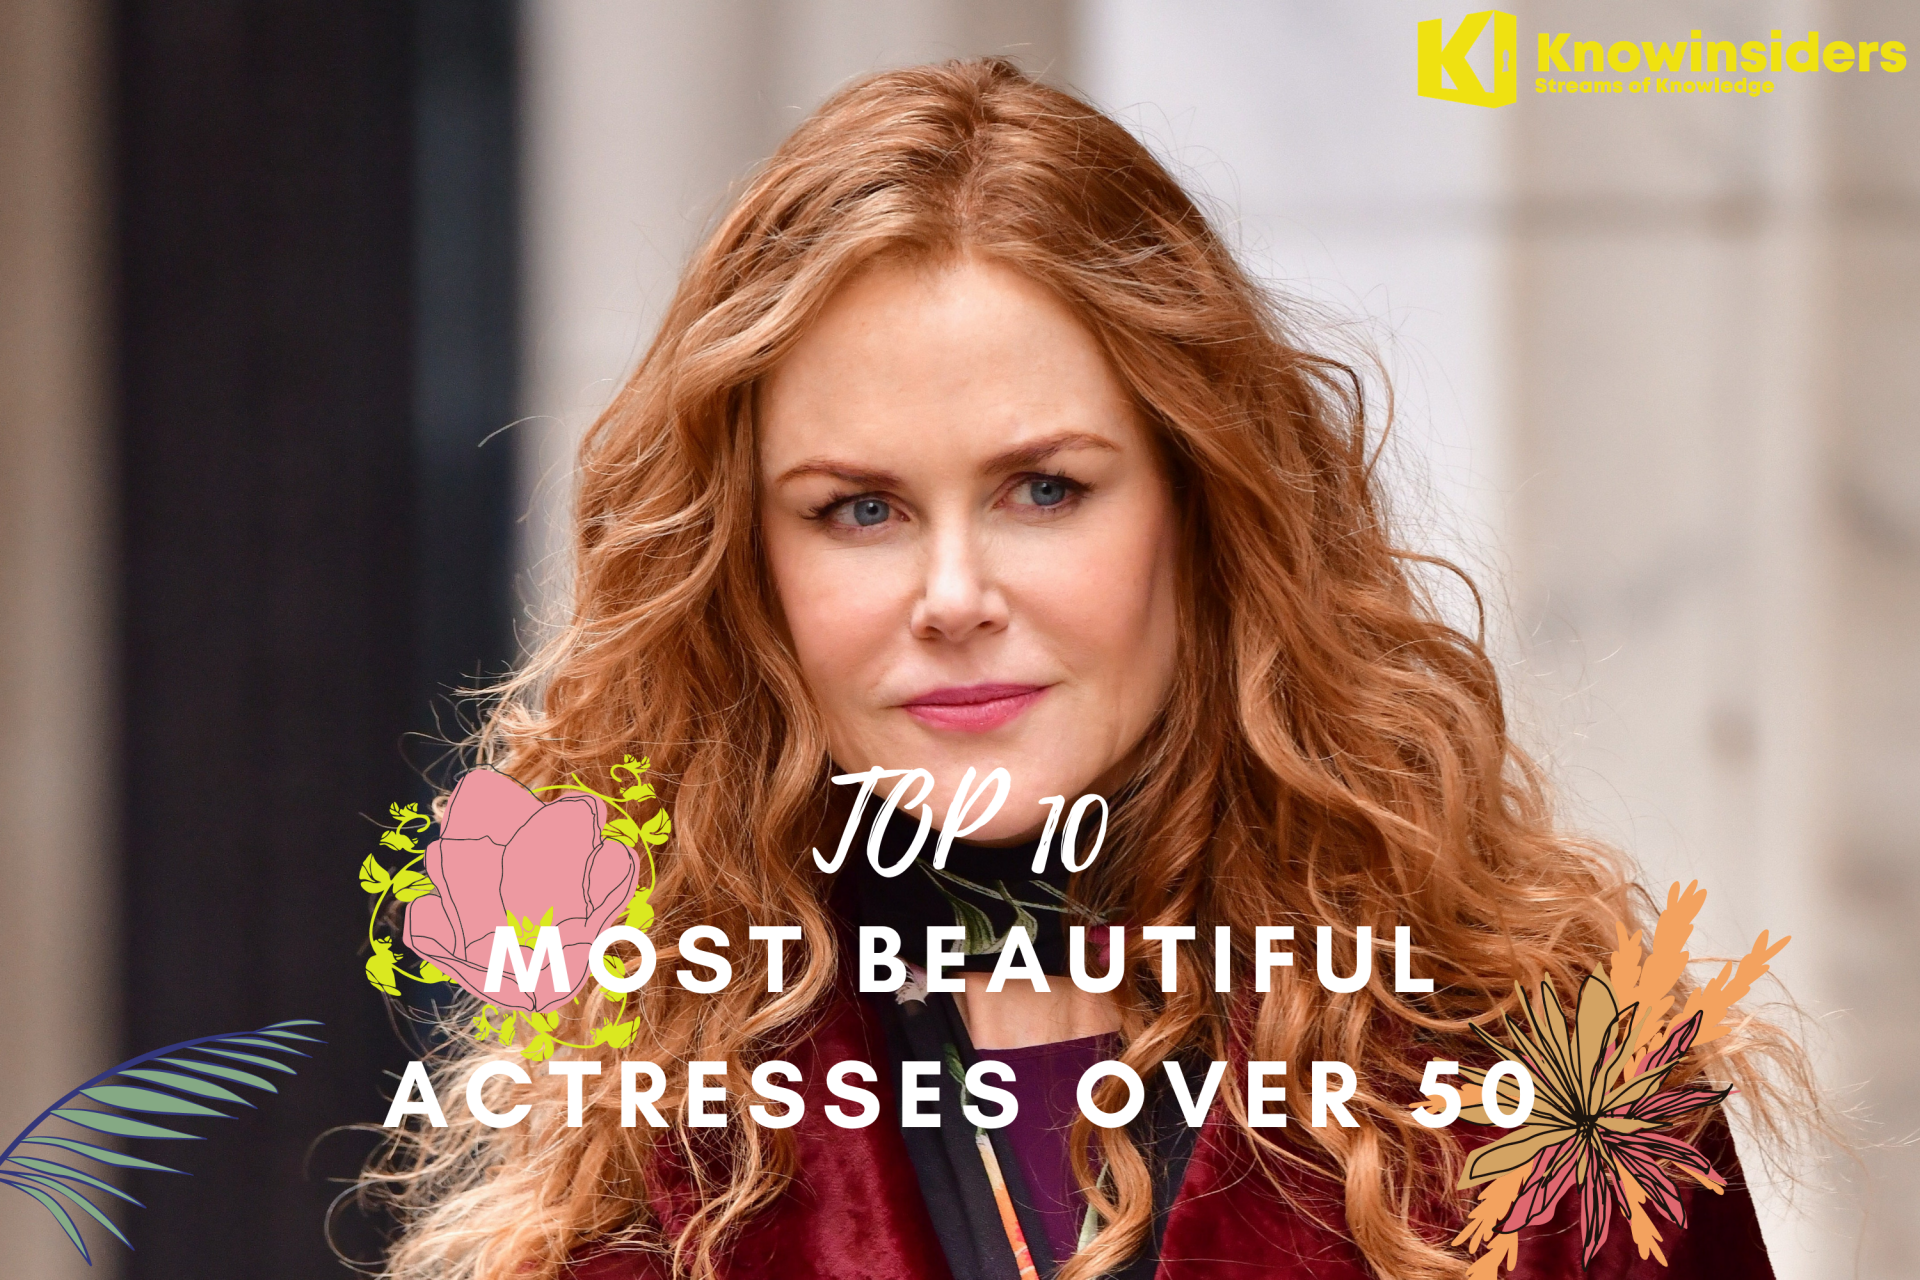 Beautiful women 50 the most over We've Ranked